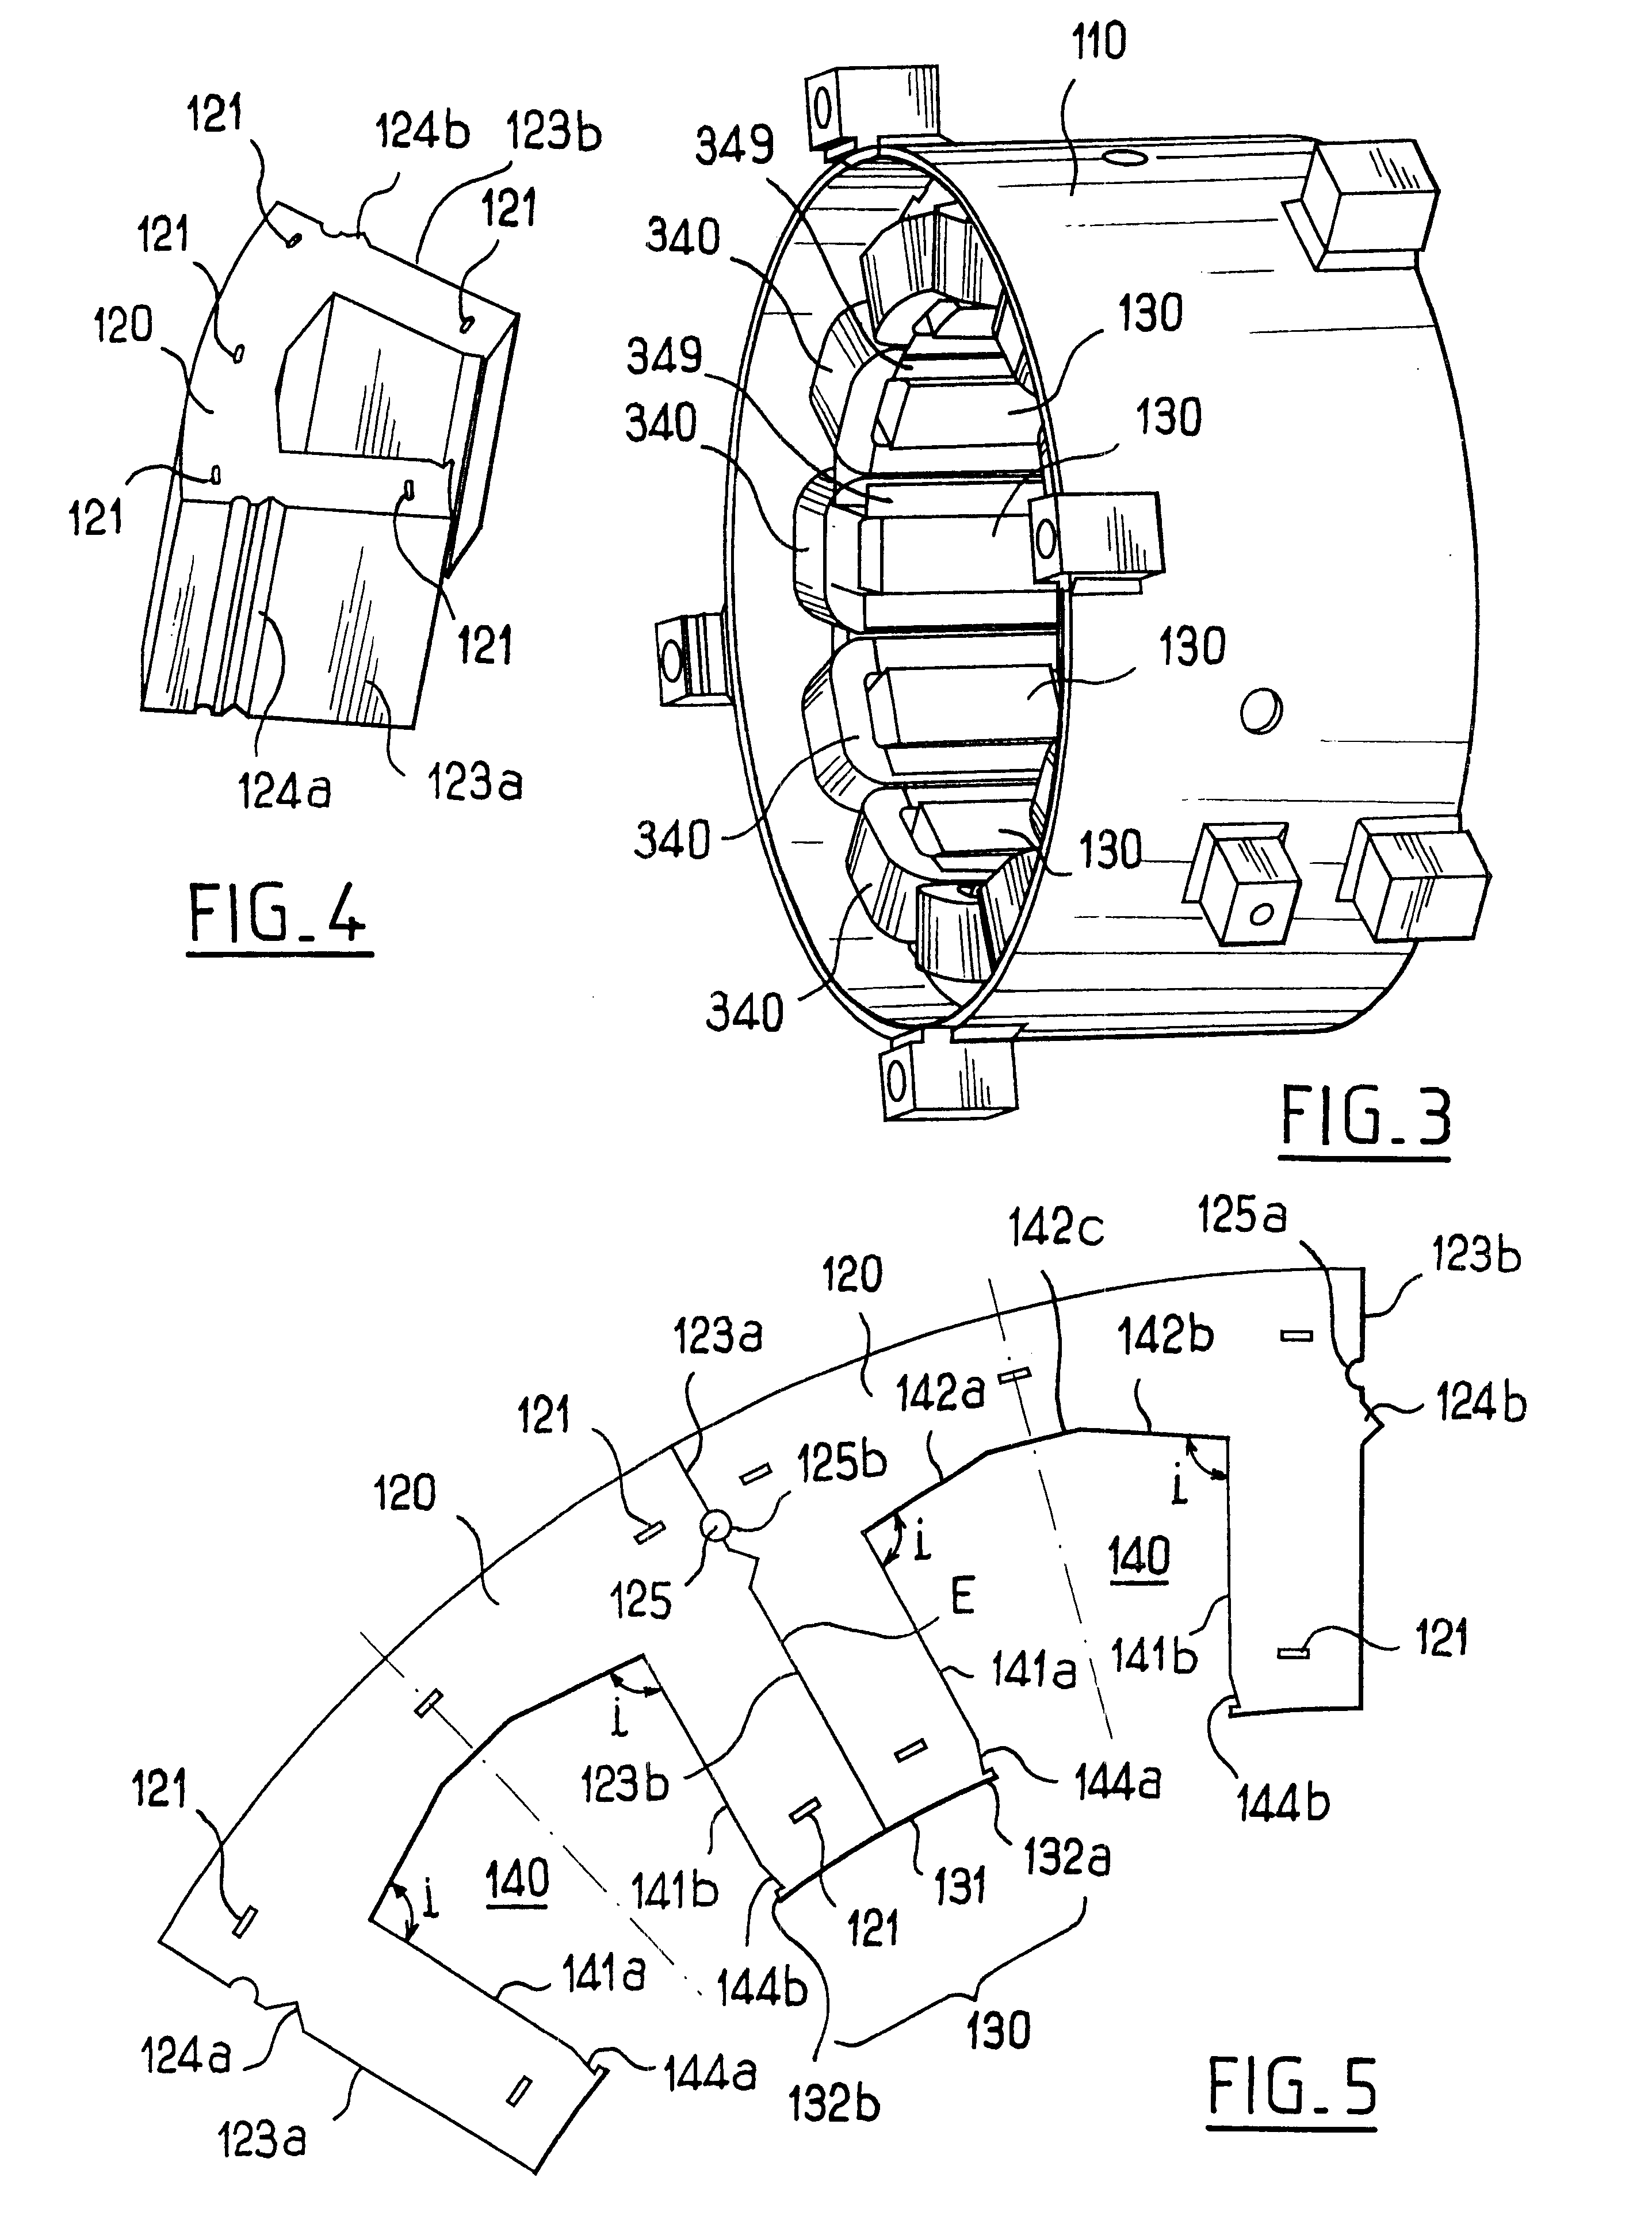 Rotary electric machine stator having individual removable coils